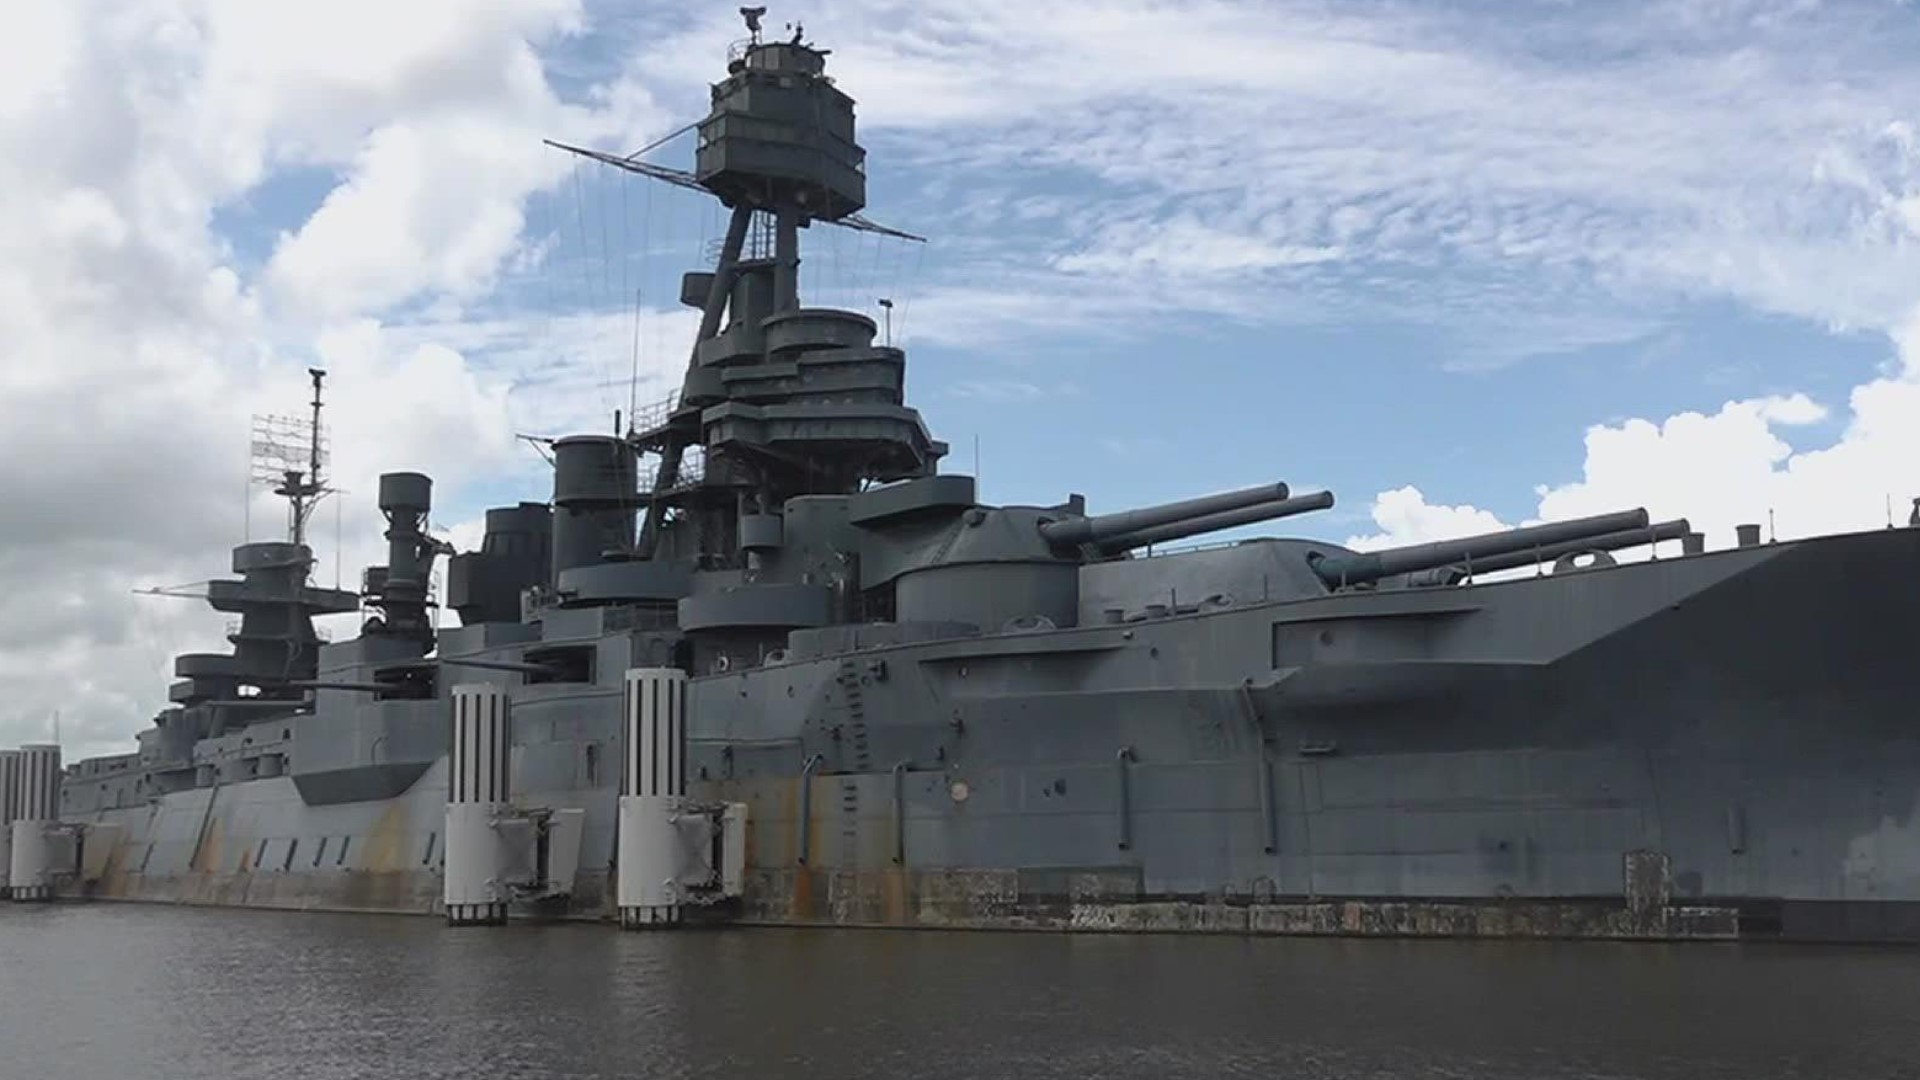 Beaumont remains in the running to become the home of Battleship Texas even though the city council delayed a decision on the issue this week.